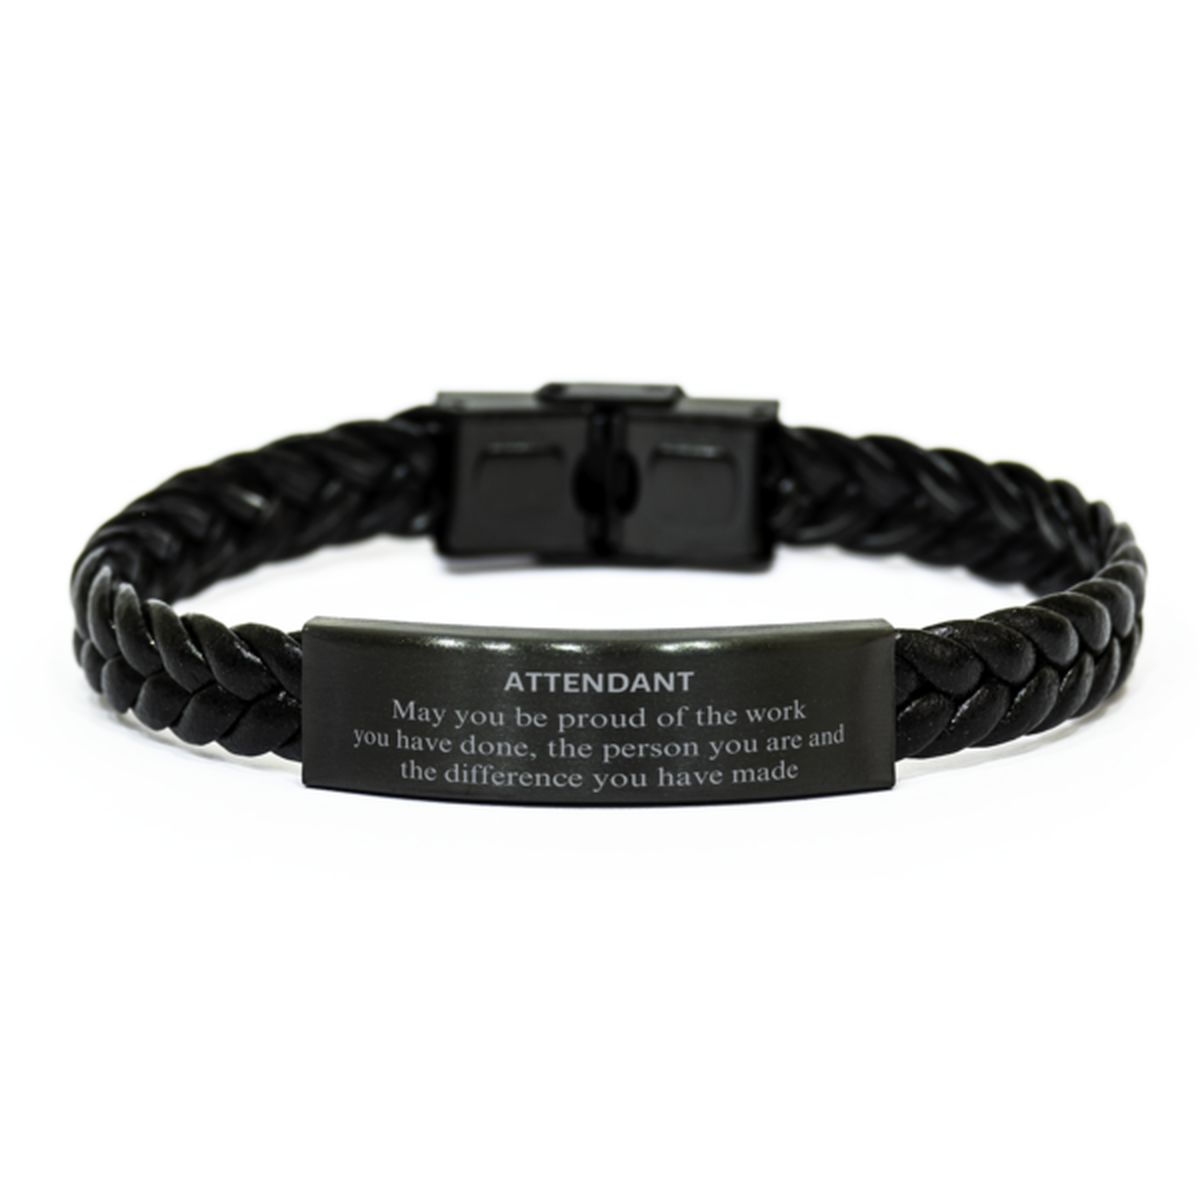 Attendant May you be proud of the work you have done, Retirement Attendant Braided Leather Bracelet for Colleague Appreciation Gifts Amazing for Attendant